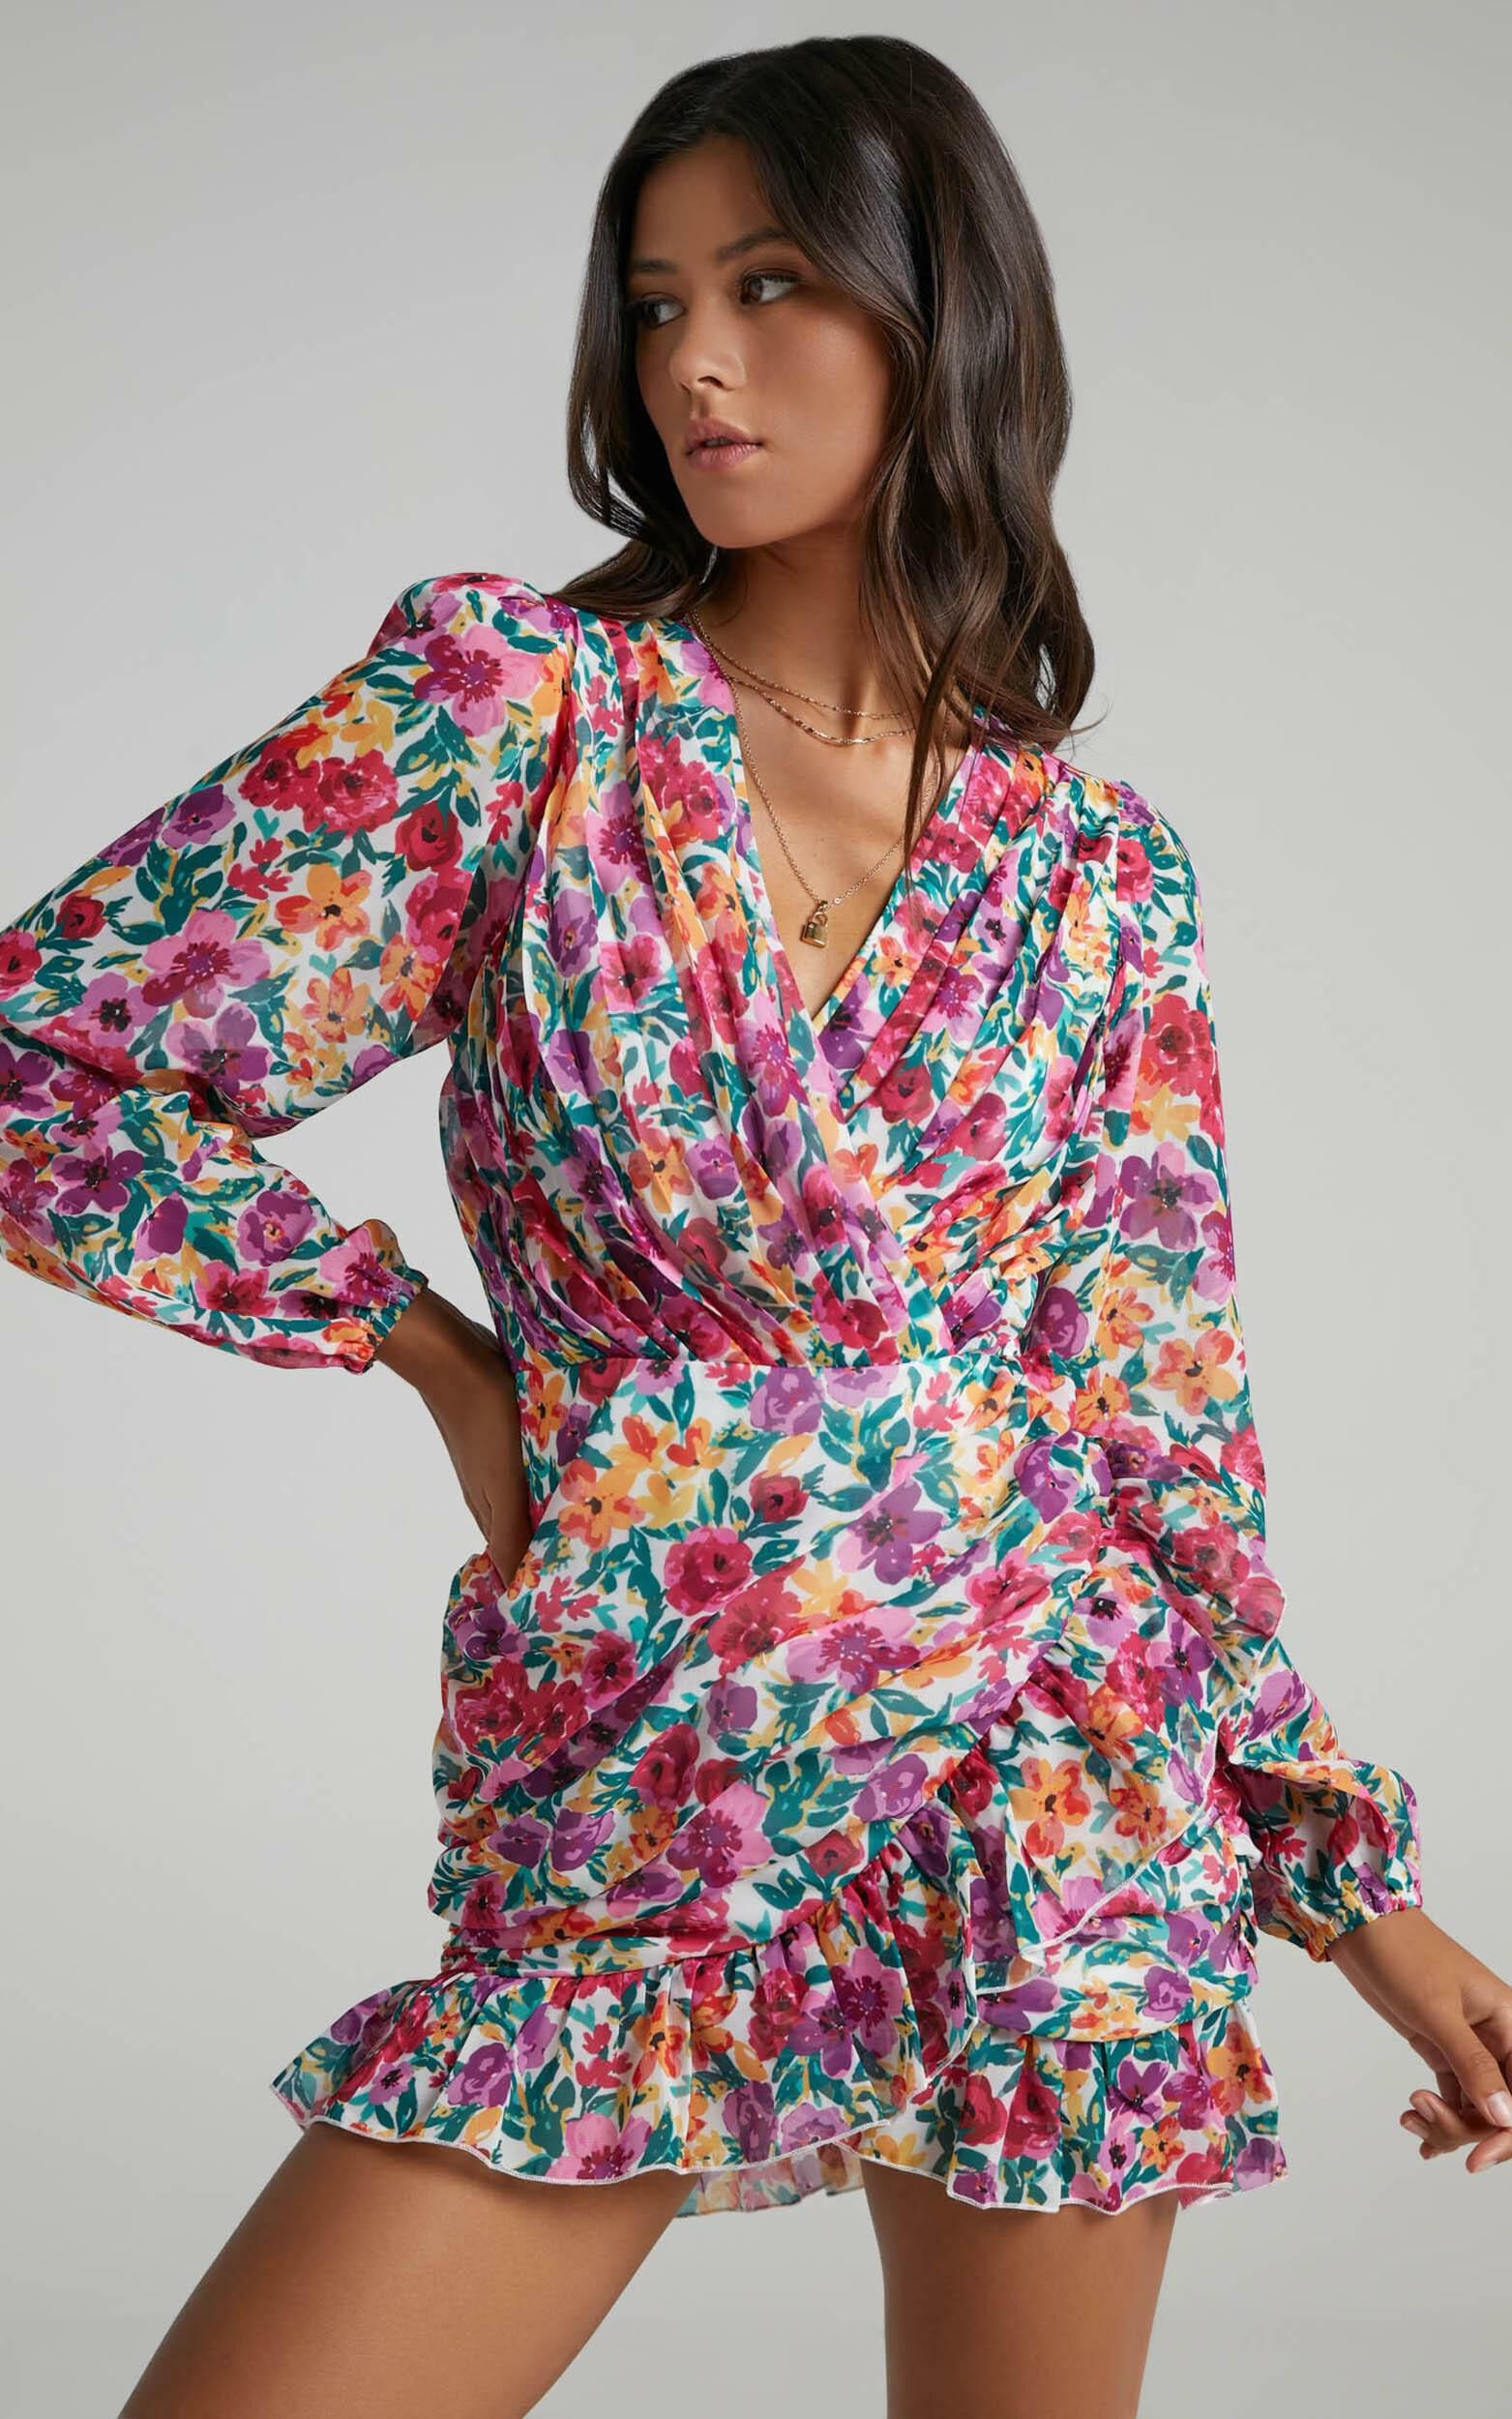 Can I Be Your Honey Dress in Packed Floral | Showpo USA